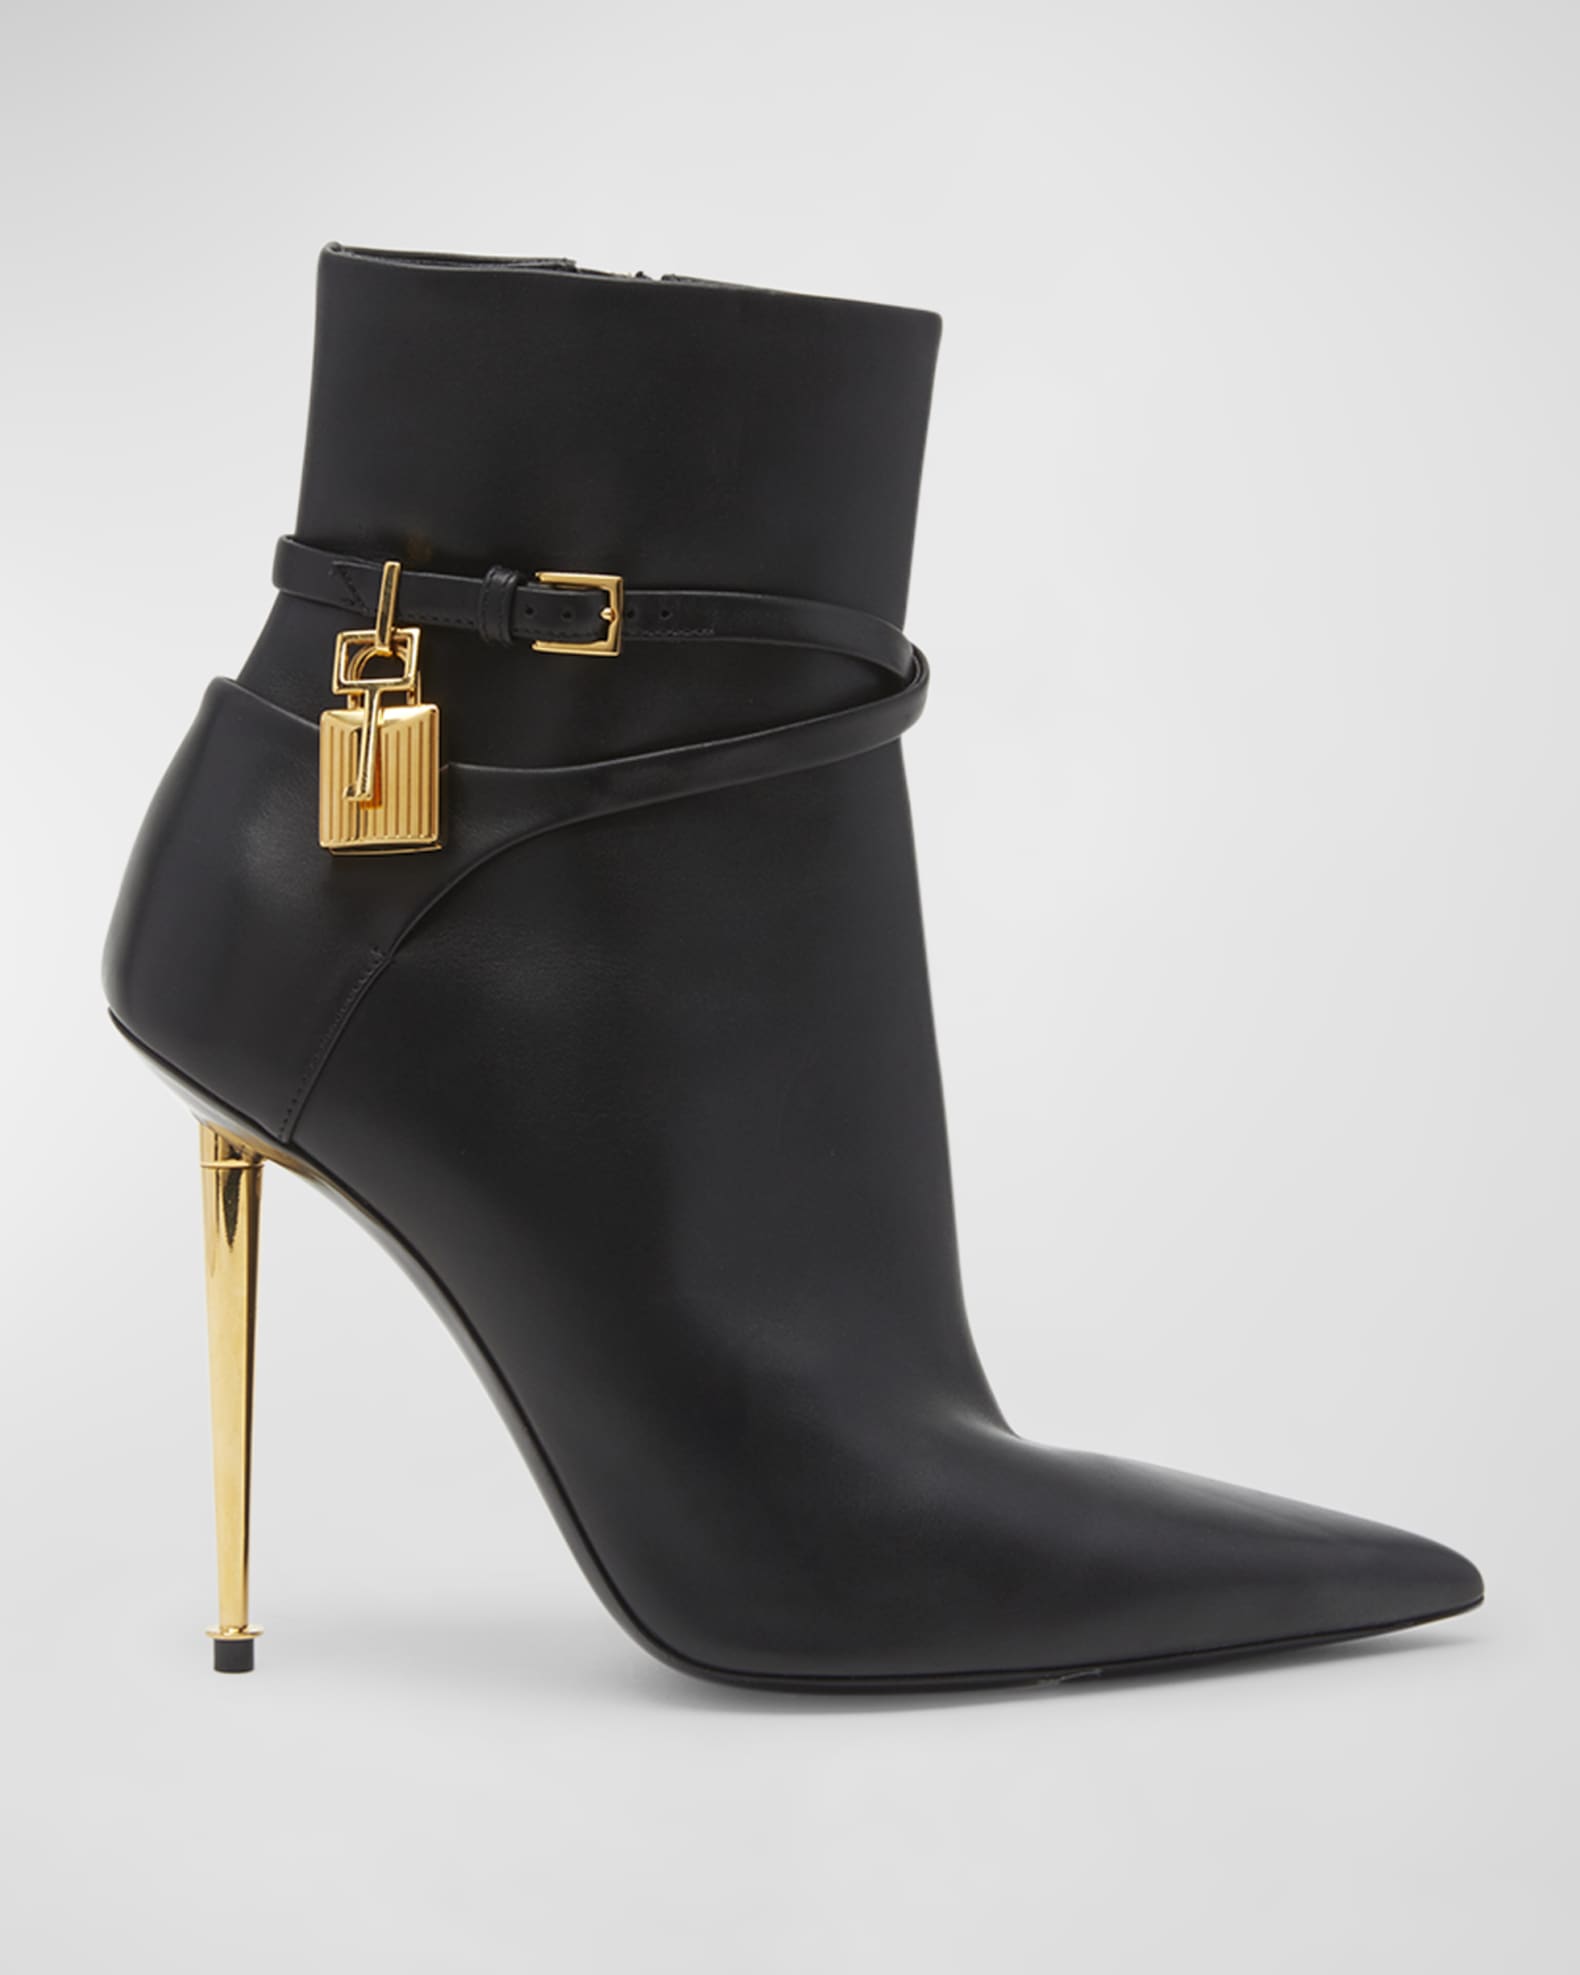 TOM FORD Lock 105mm Leather Ankle Booties | Neiman Marcus